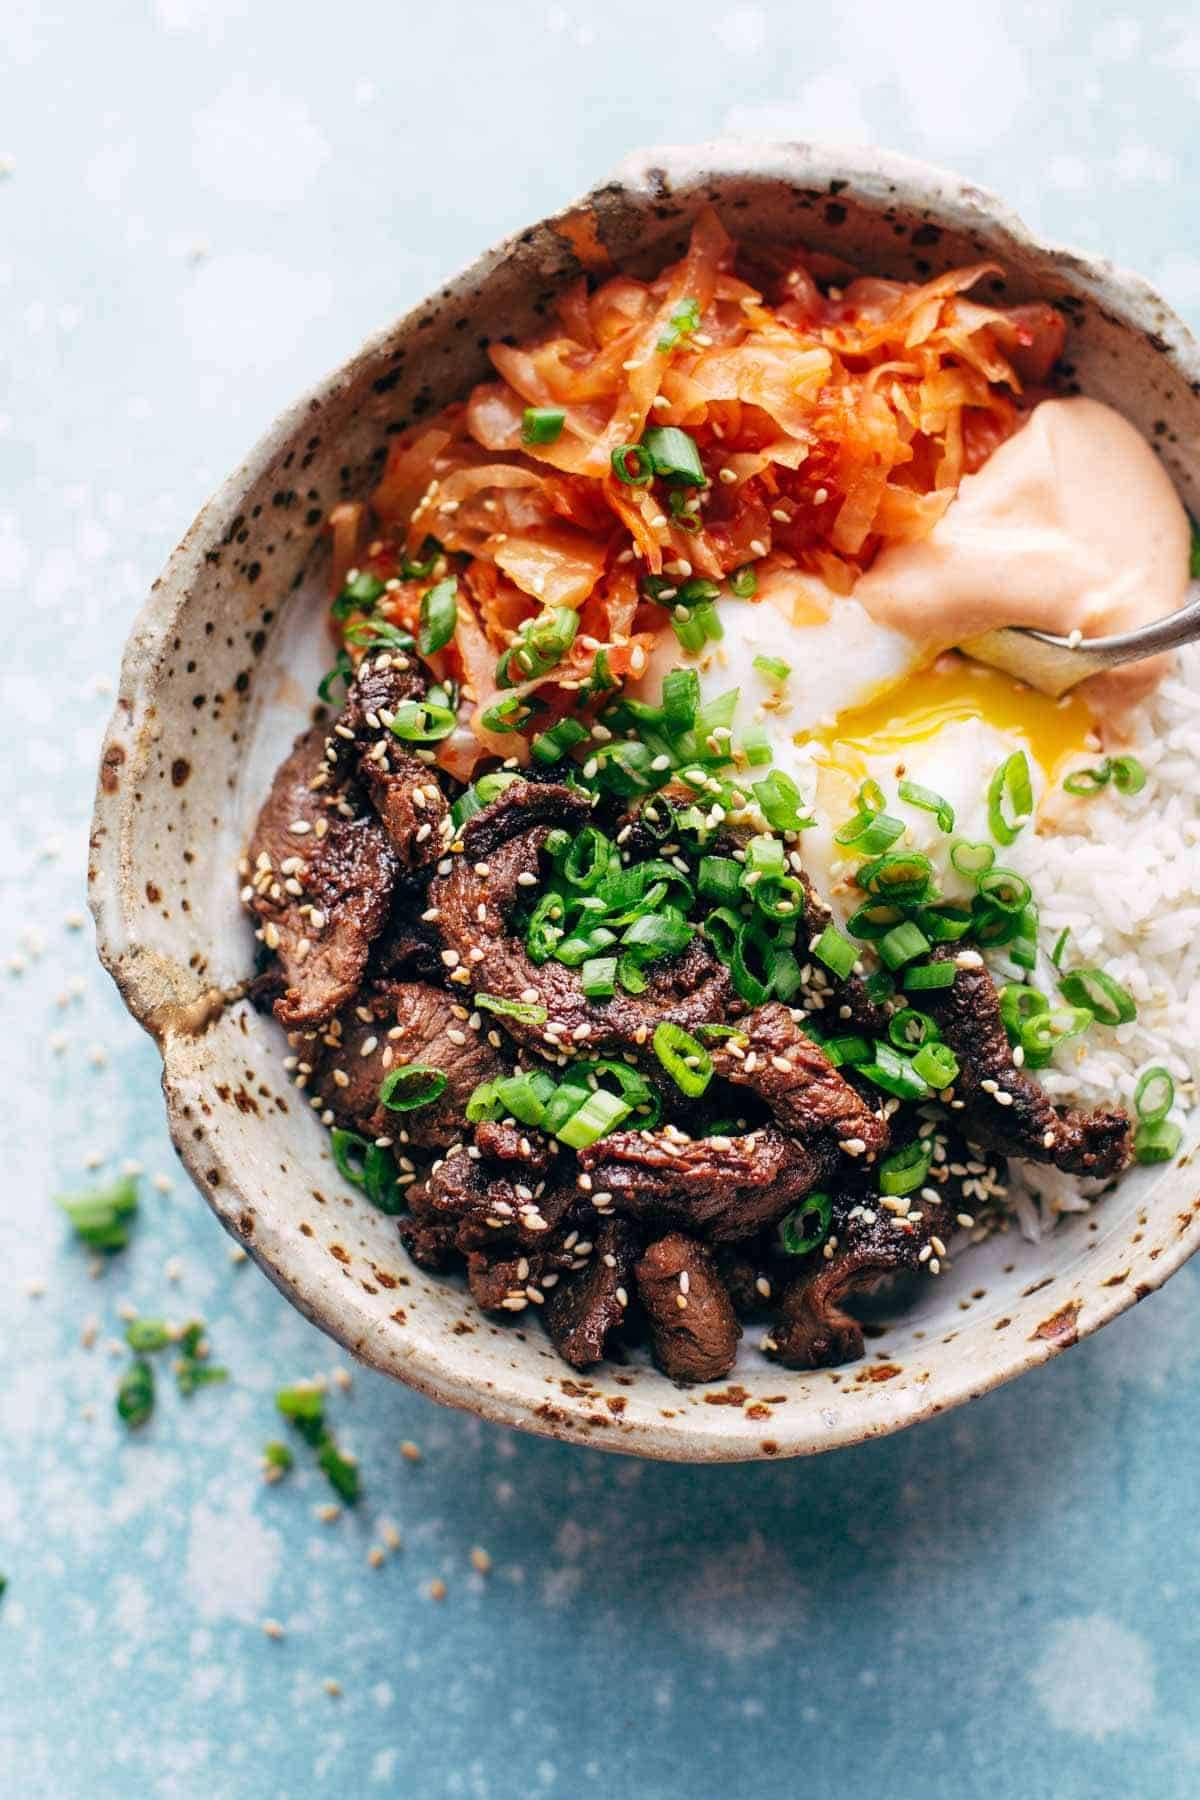 Korean beef along with carrot, onion and spicy mayo in a bowl with a spoon.